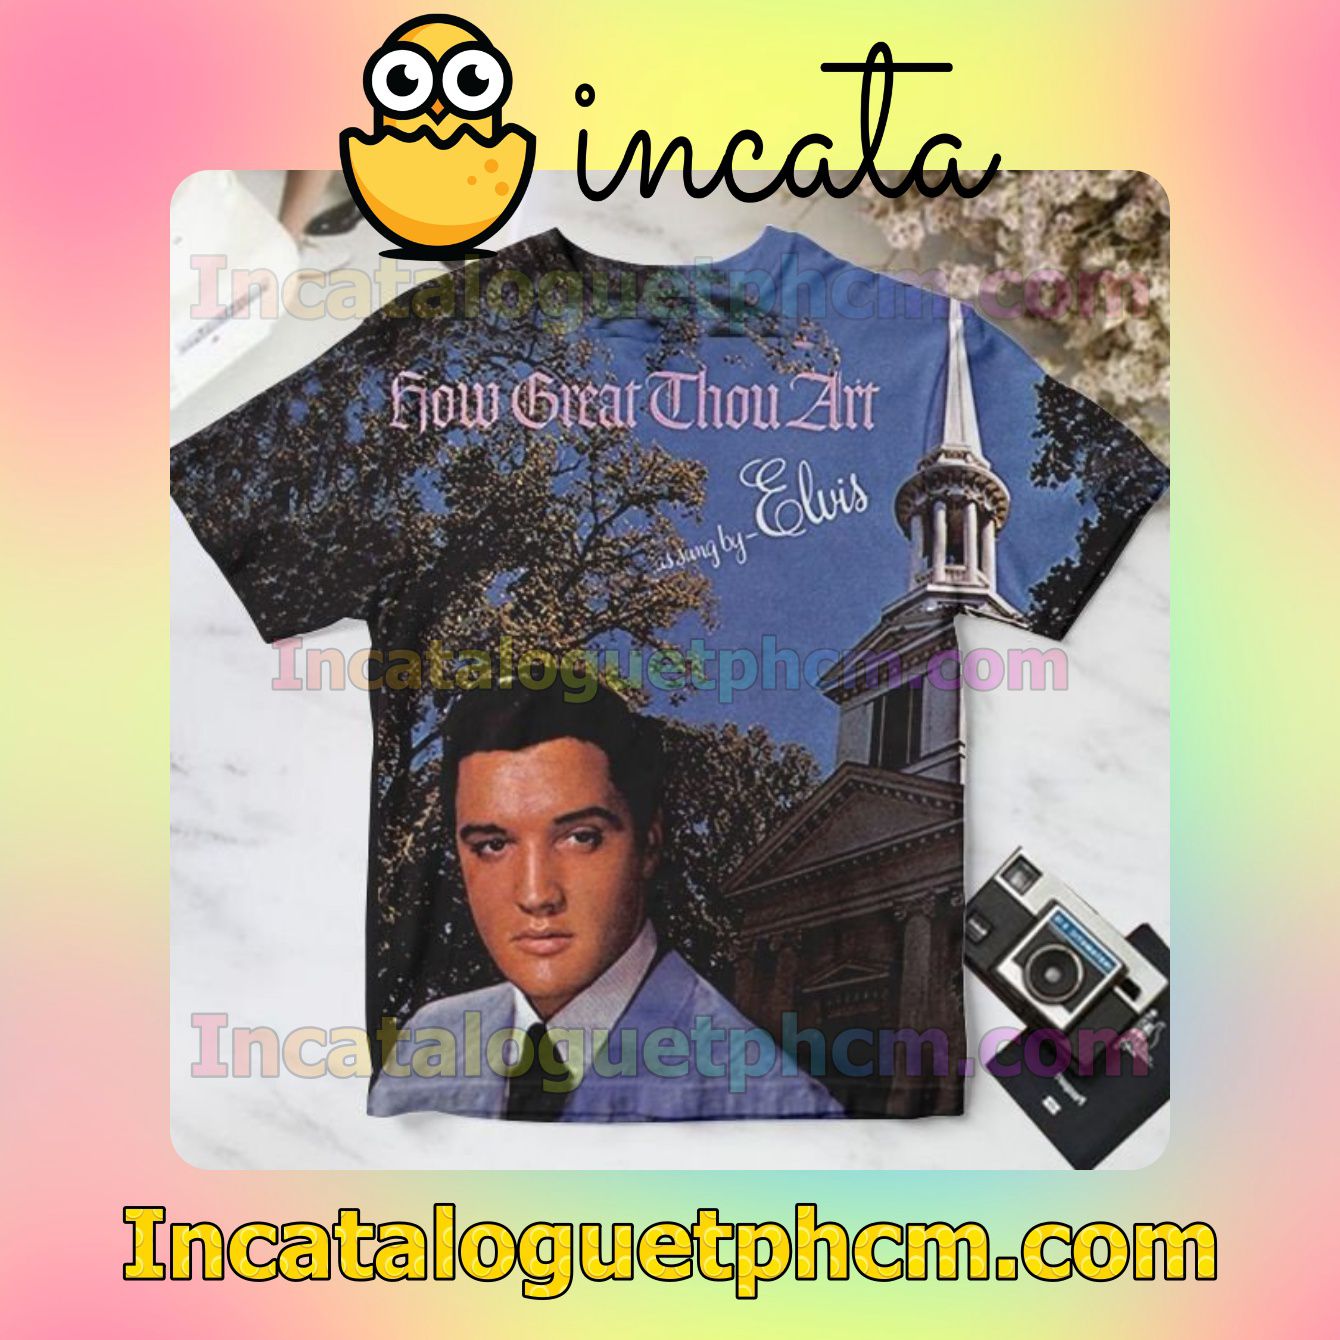 Elvis Presley How Great Thou Art Album Cover Personalized Shirt